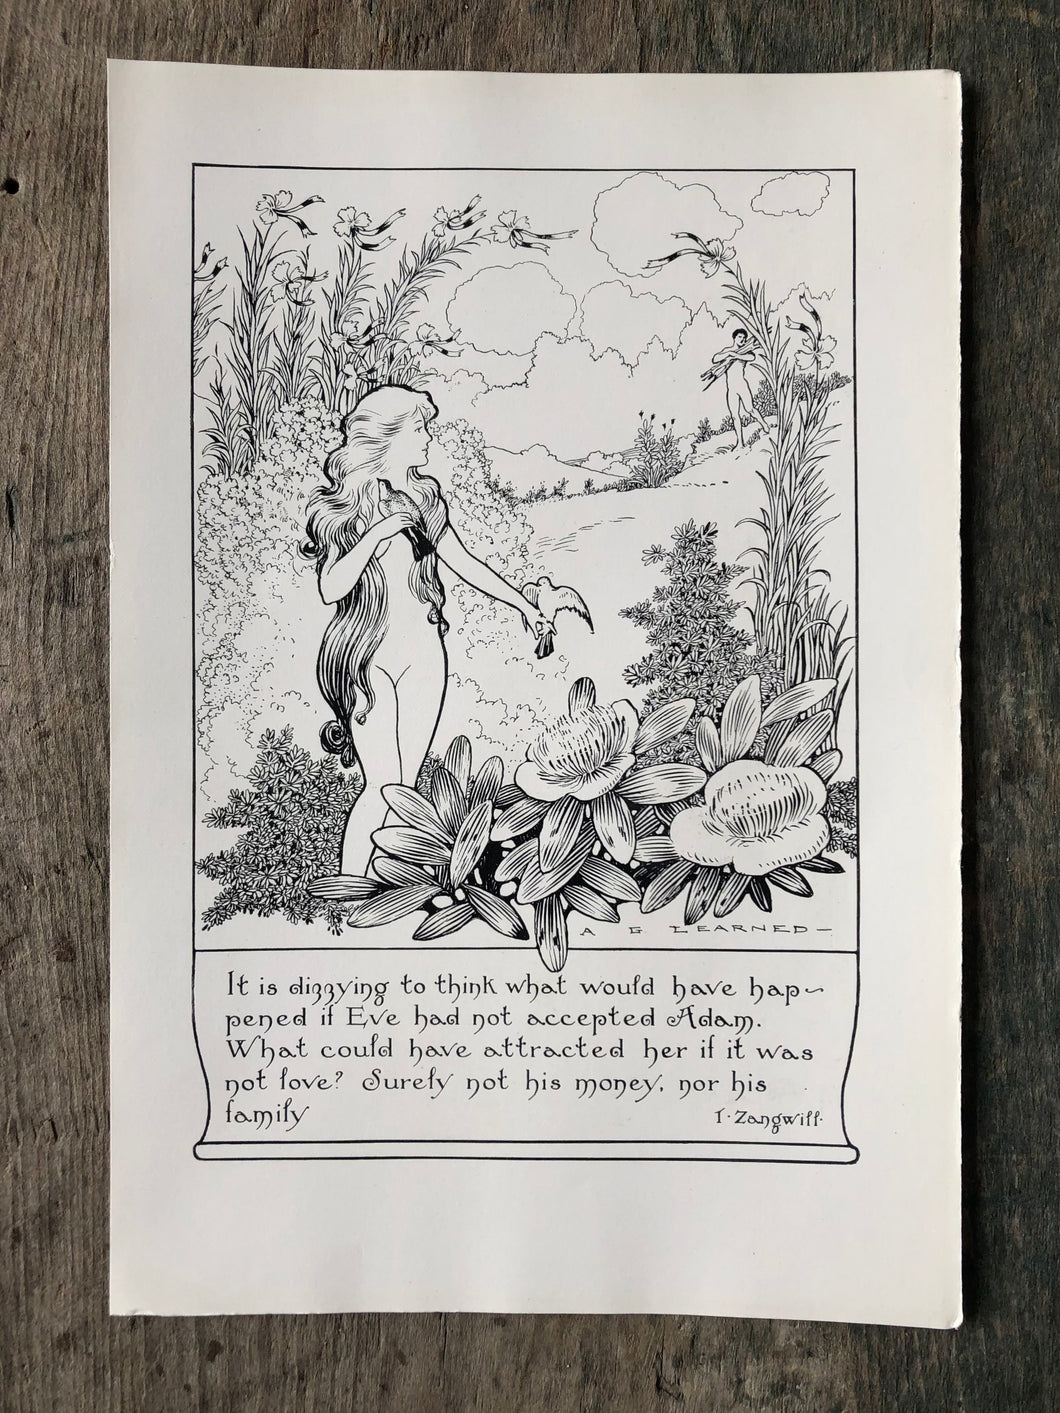 T. Zangwill Quote Print illustrated by Arthur G. Learned from “Eve’s Daughter”